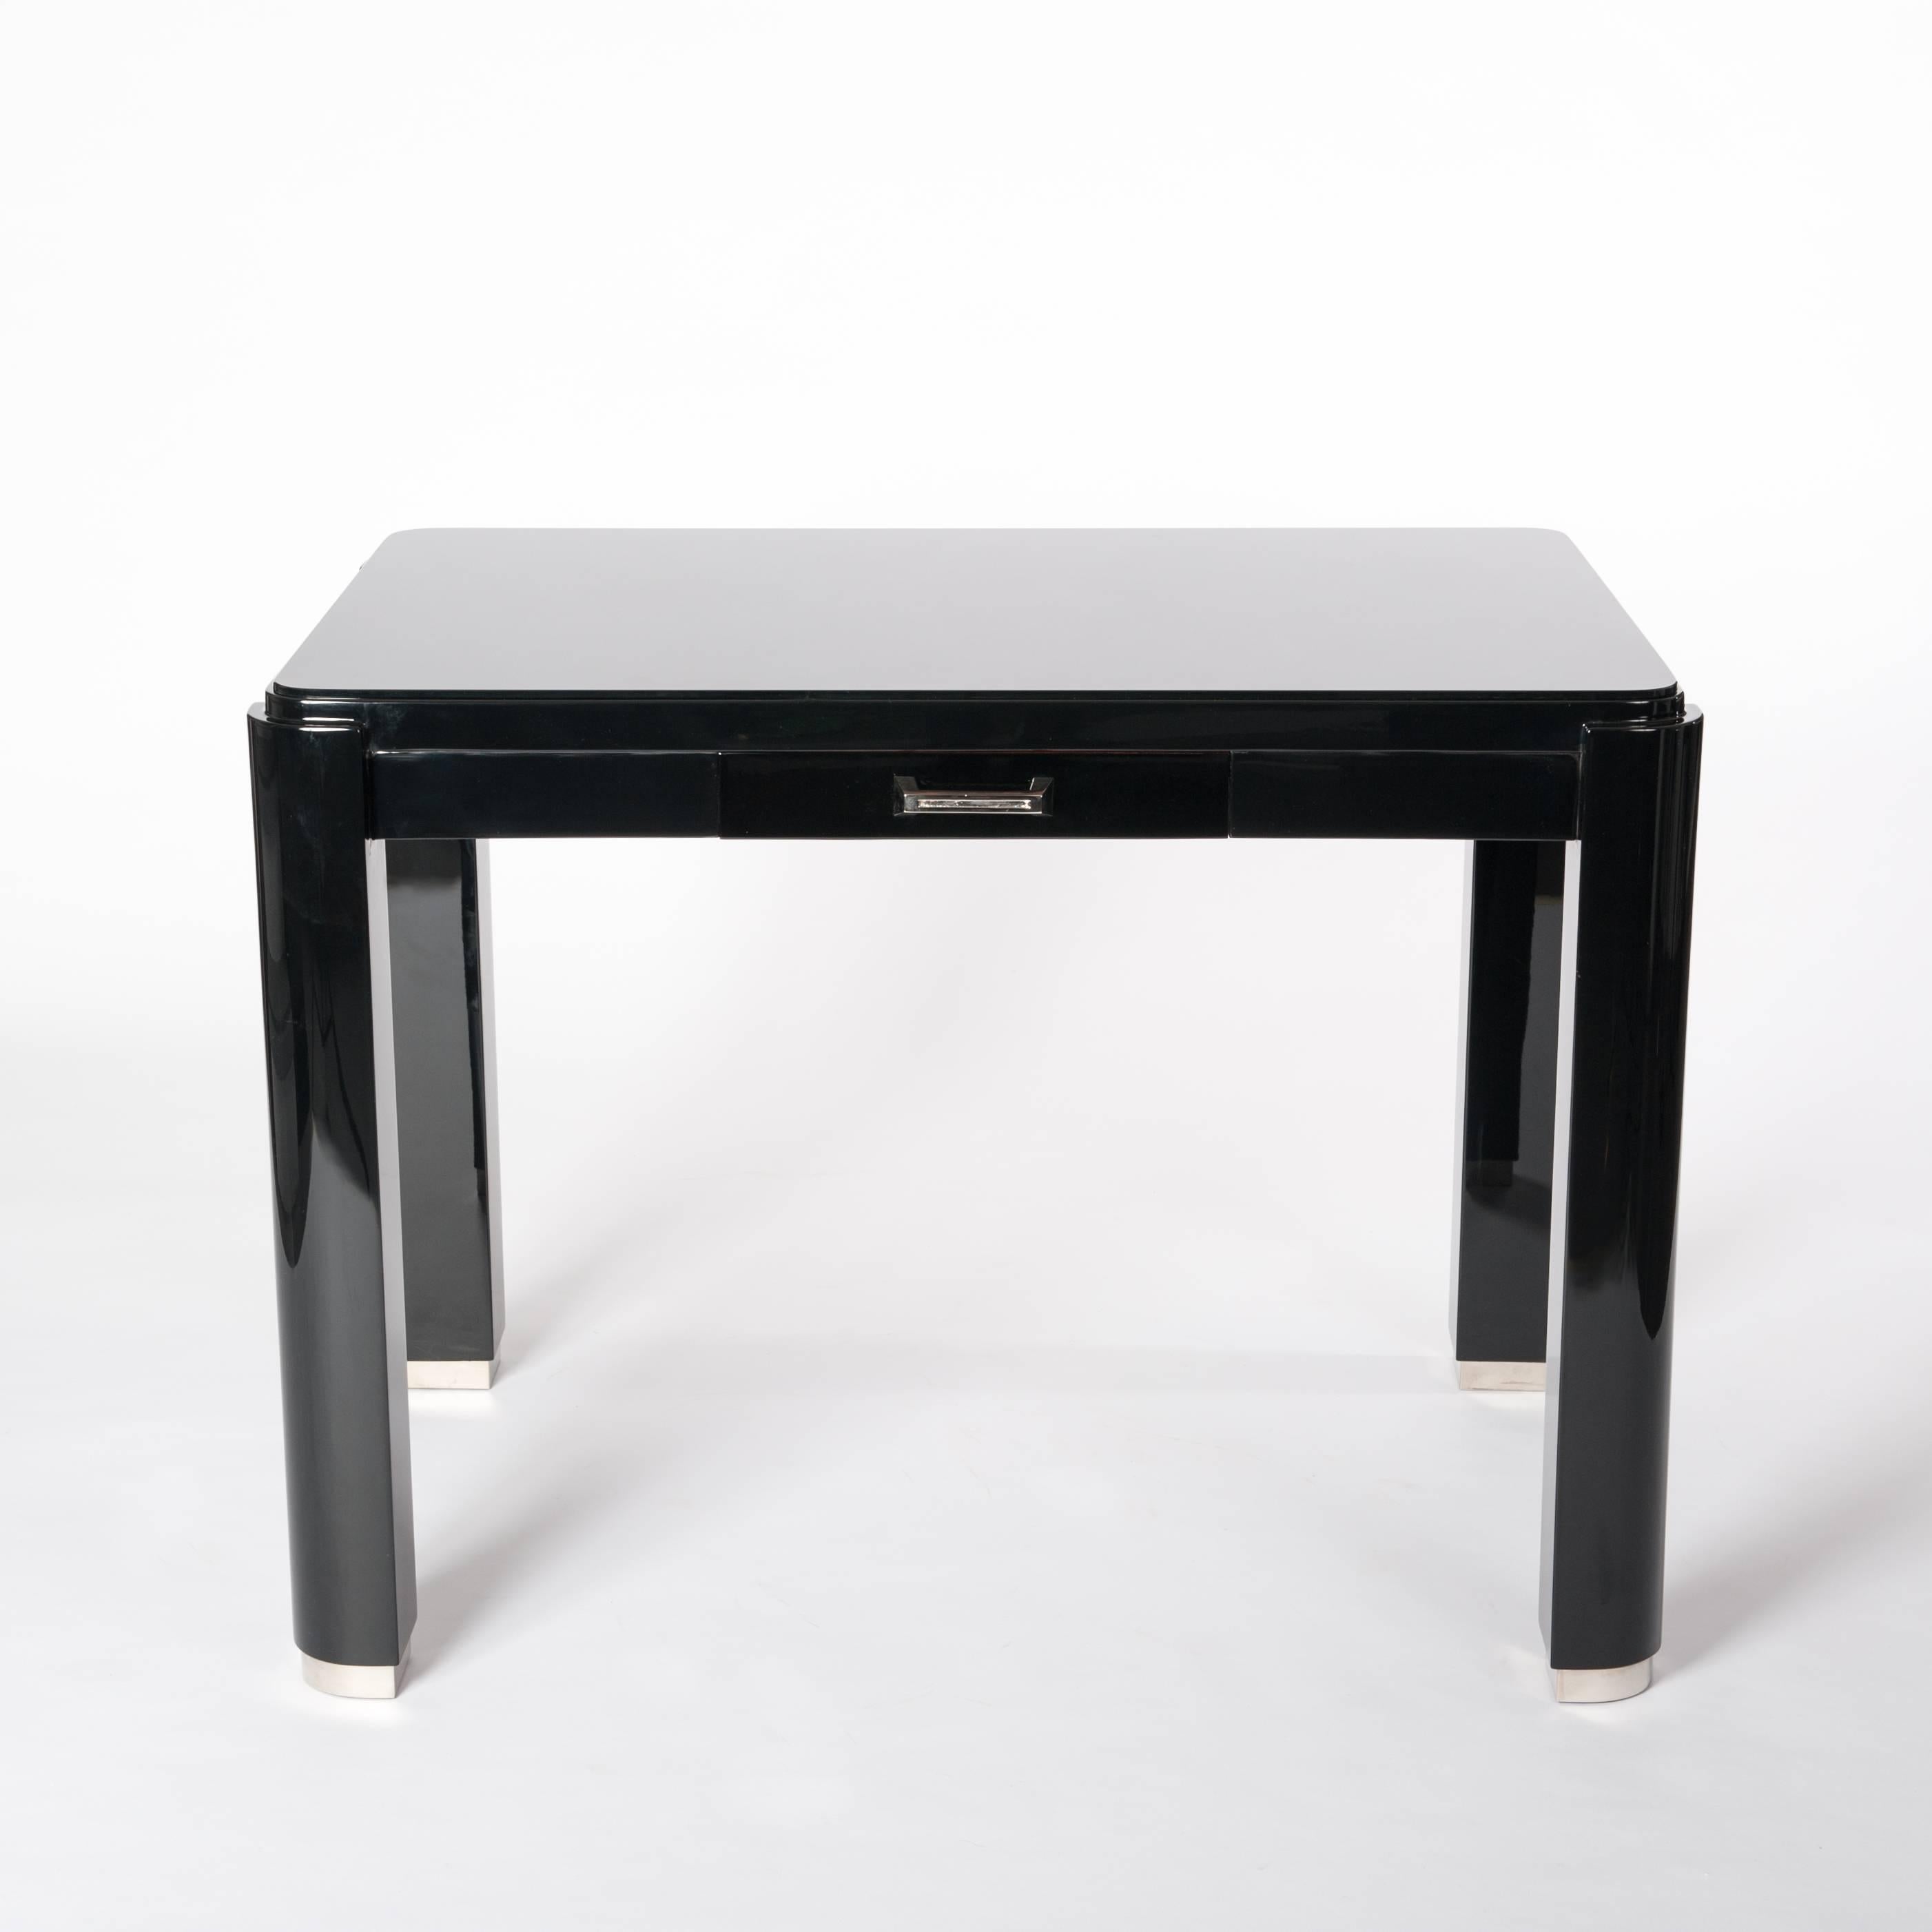 Small French Art Déco wrtiing table or desk in cubistic design.
Black lacquered with re-nickeled handle and foot mountings.
The tabletop is covered by a black glass plate for protecting the surface.

